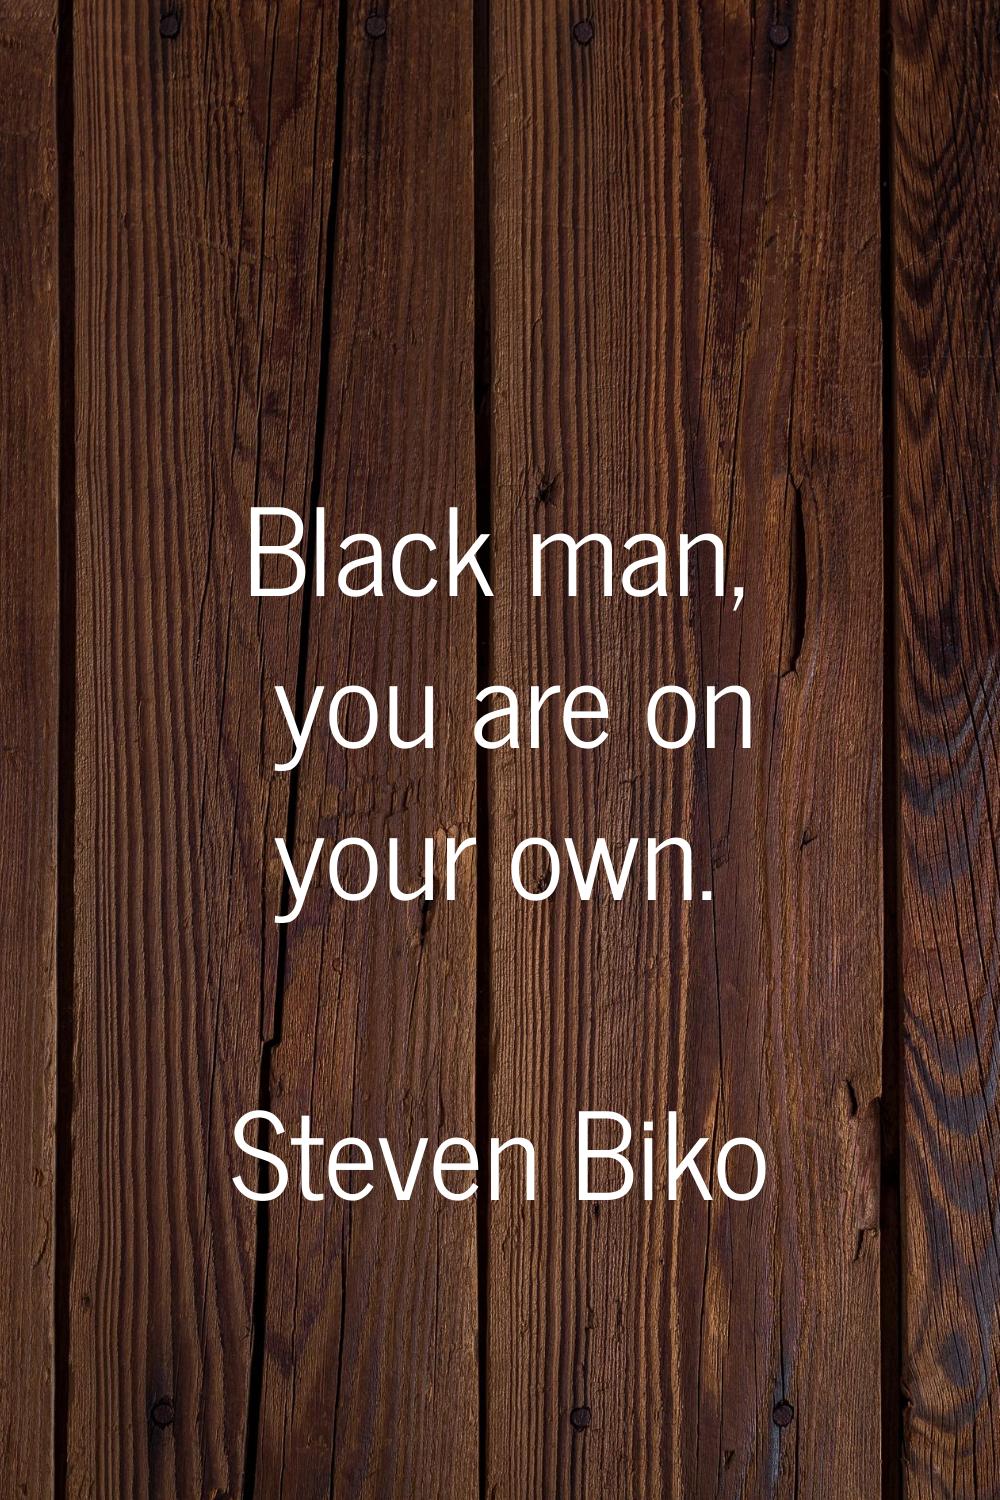 Black man, you are on your own.